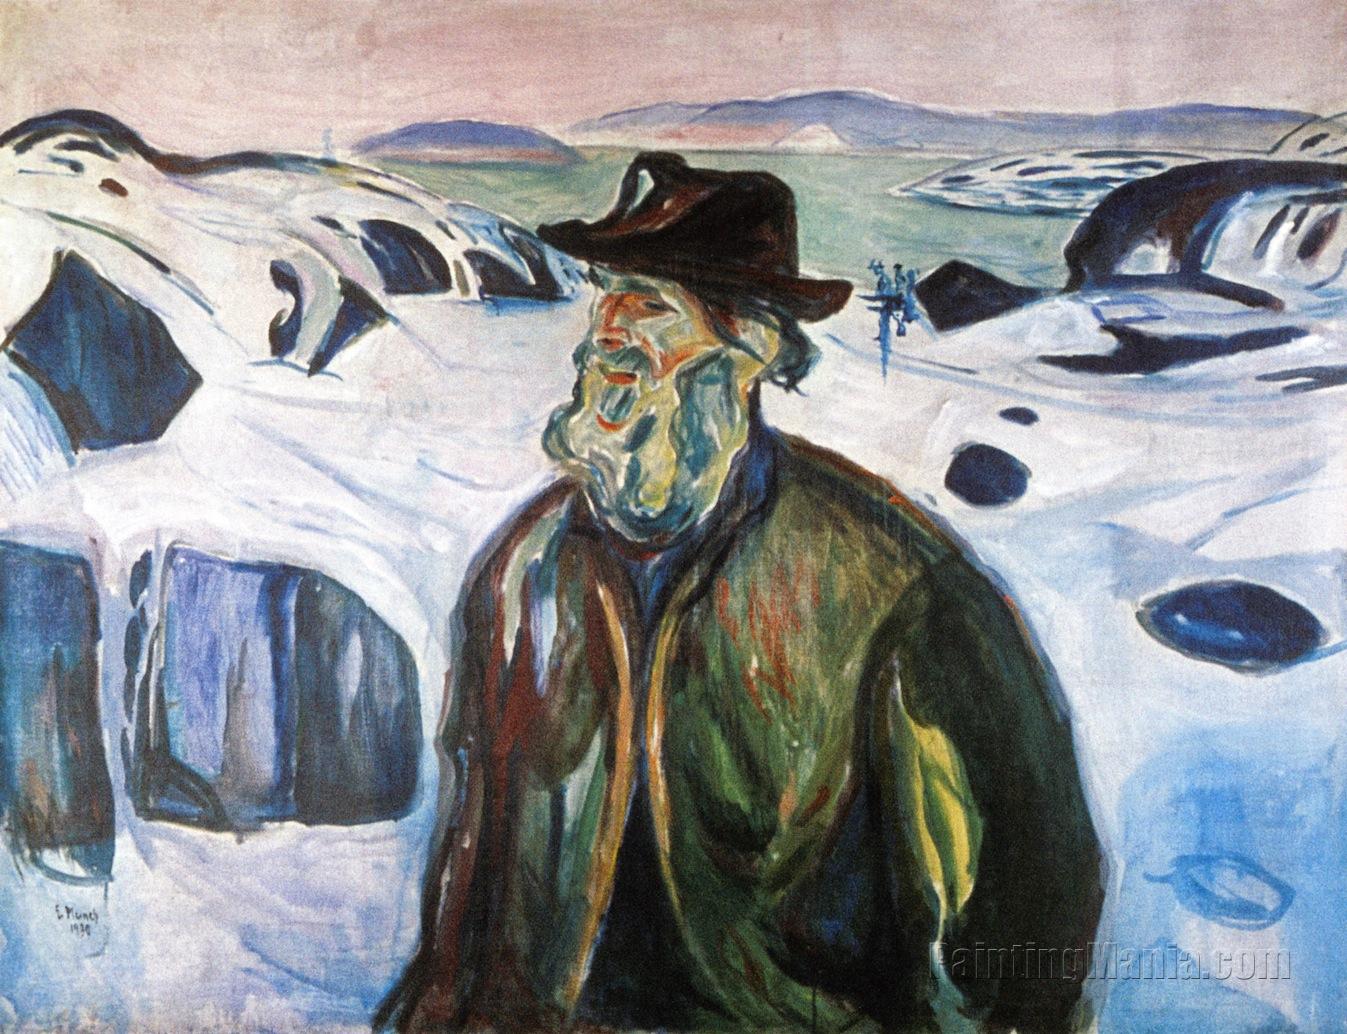 Old Fisherman on Snow-Covered Coast 1930